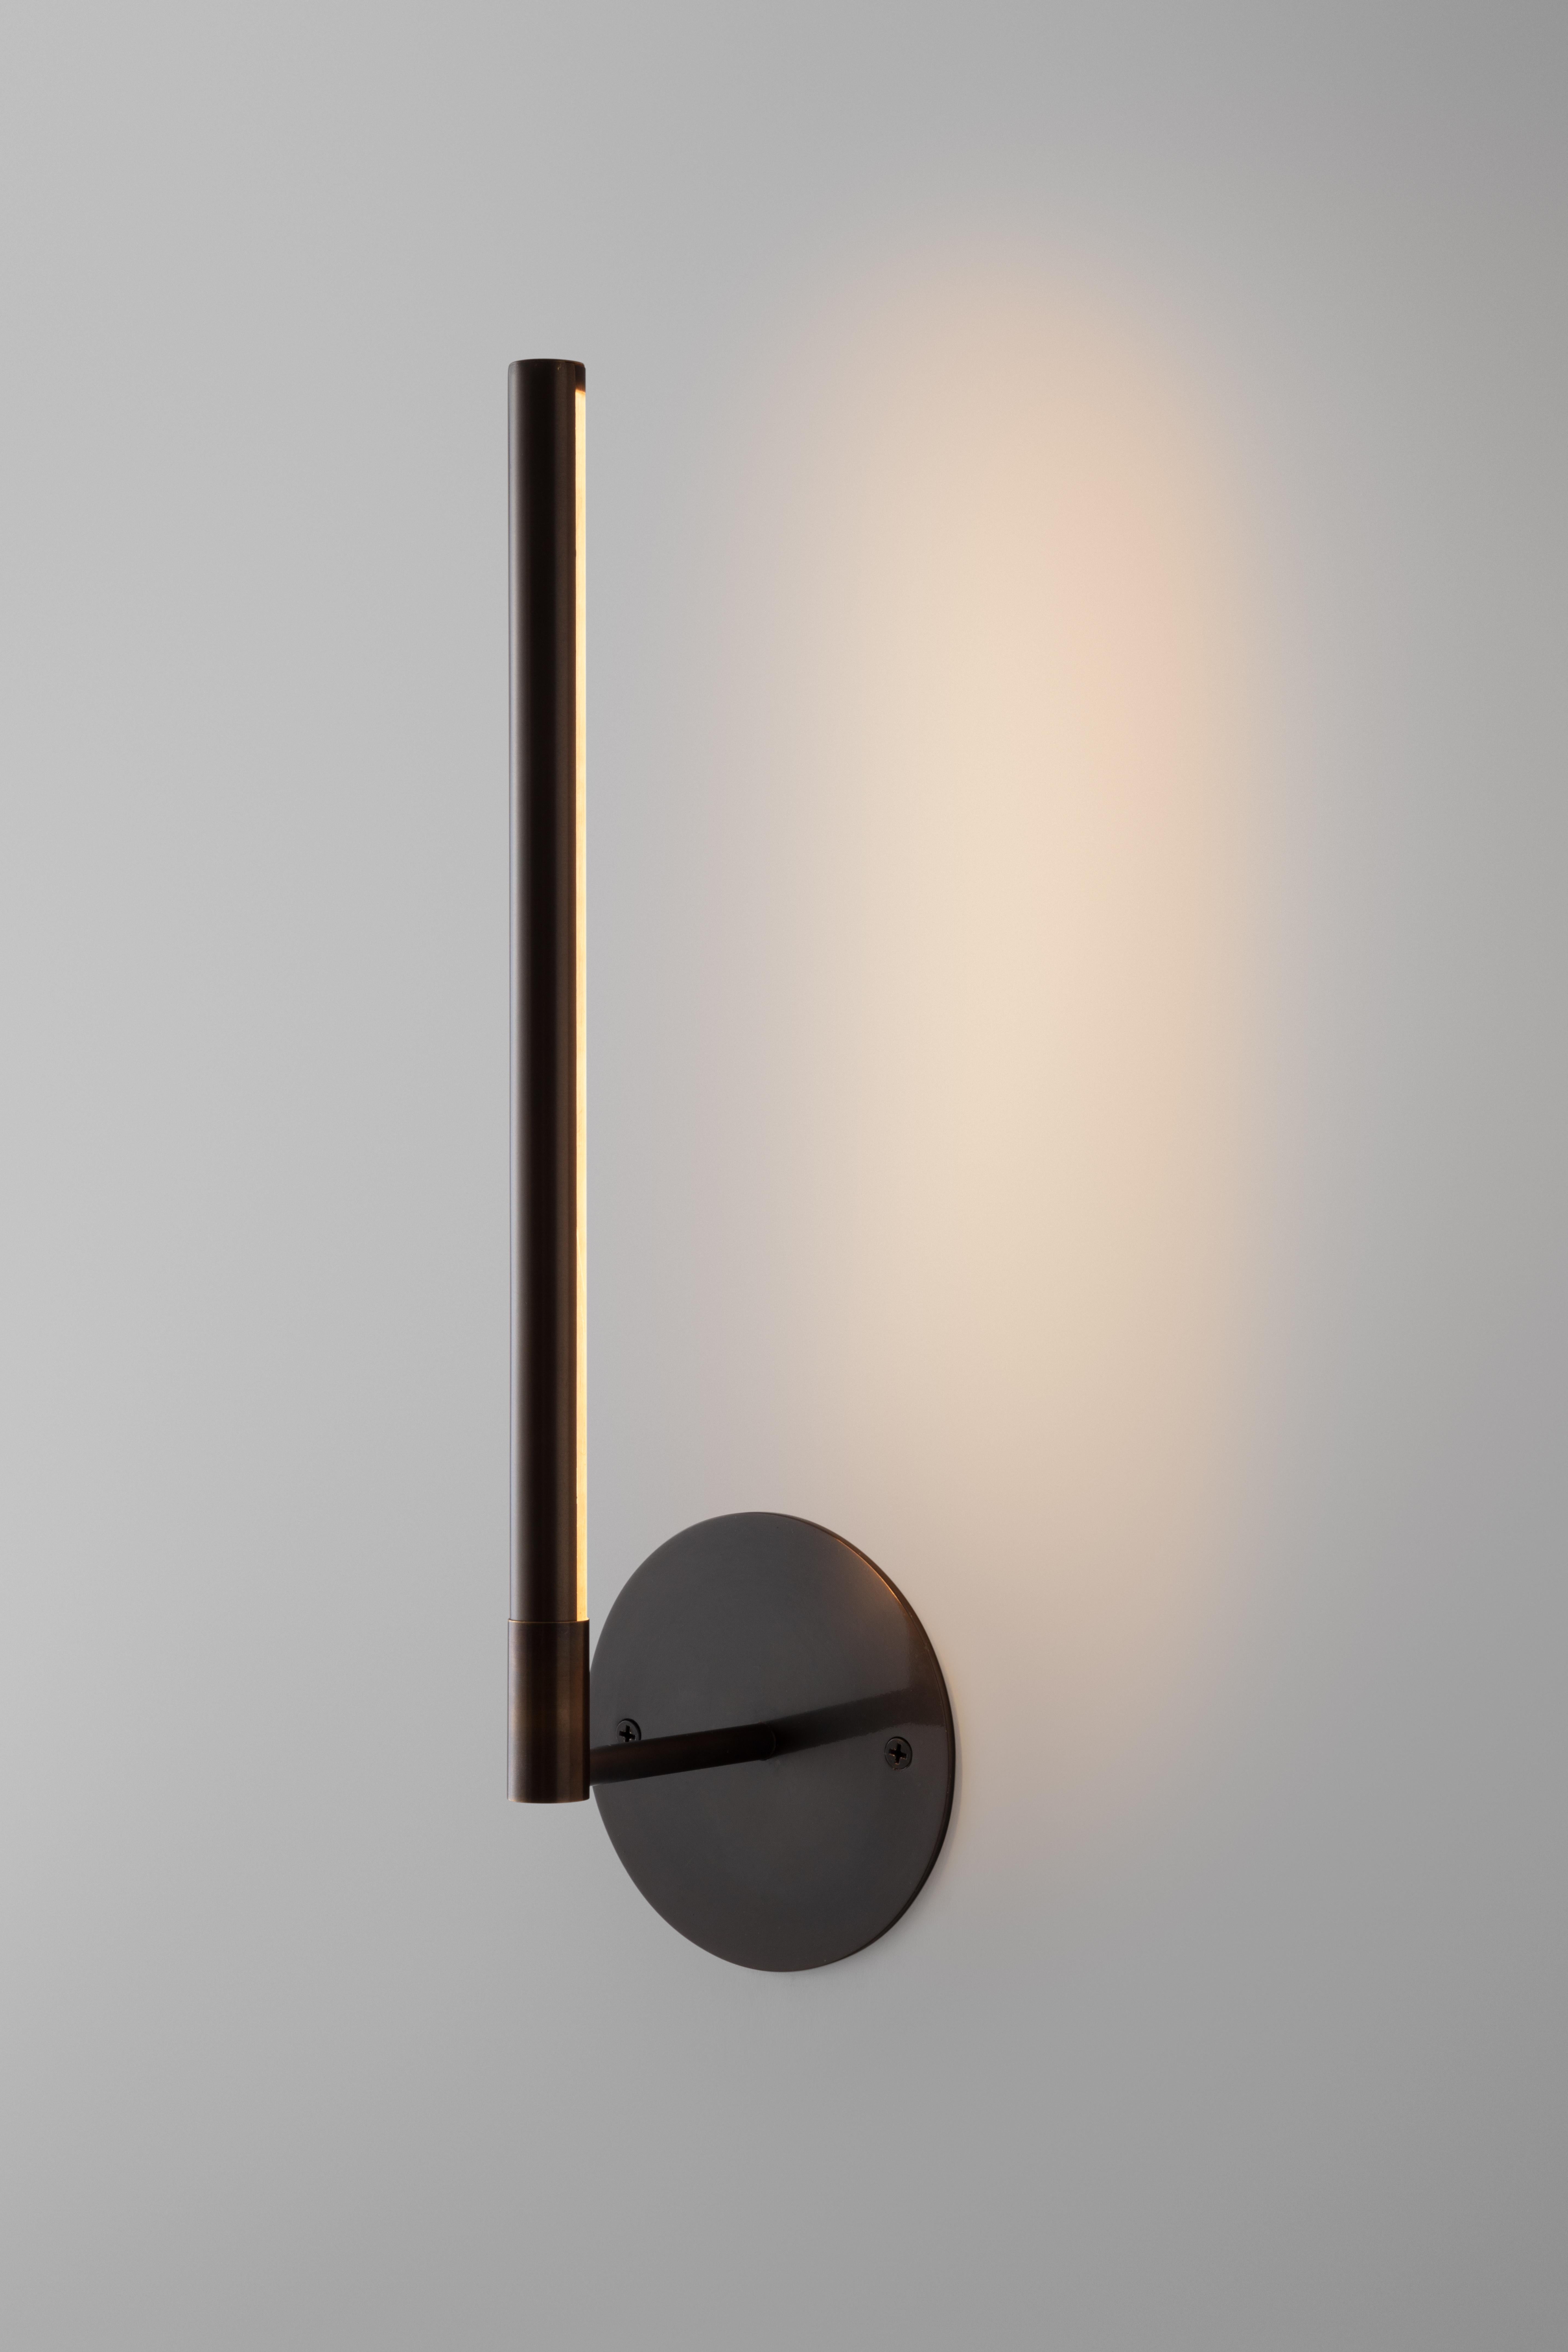 Candelabra Picture Light Adjustable Minimal Brass Linear LED Sconce, UL In New Condition For Sale In Brooklyn, NY